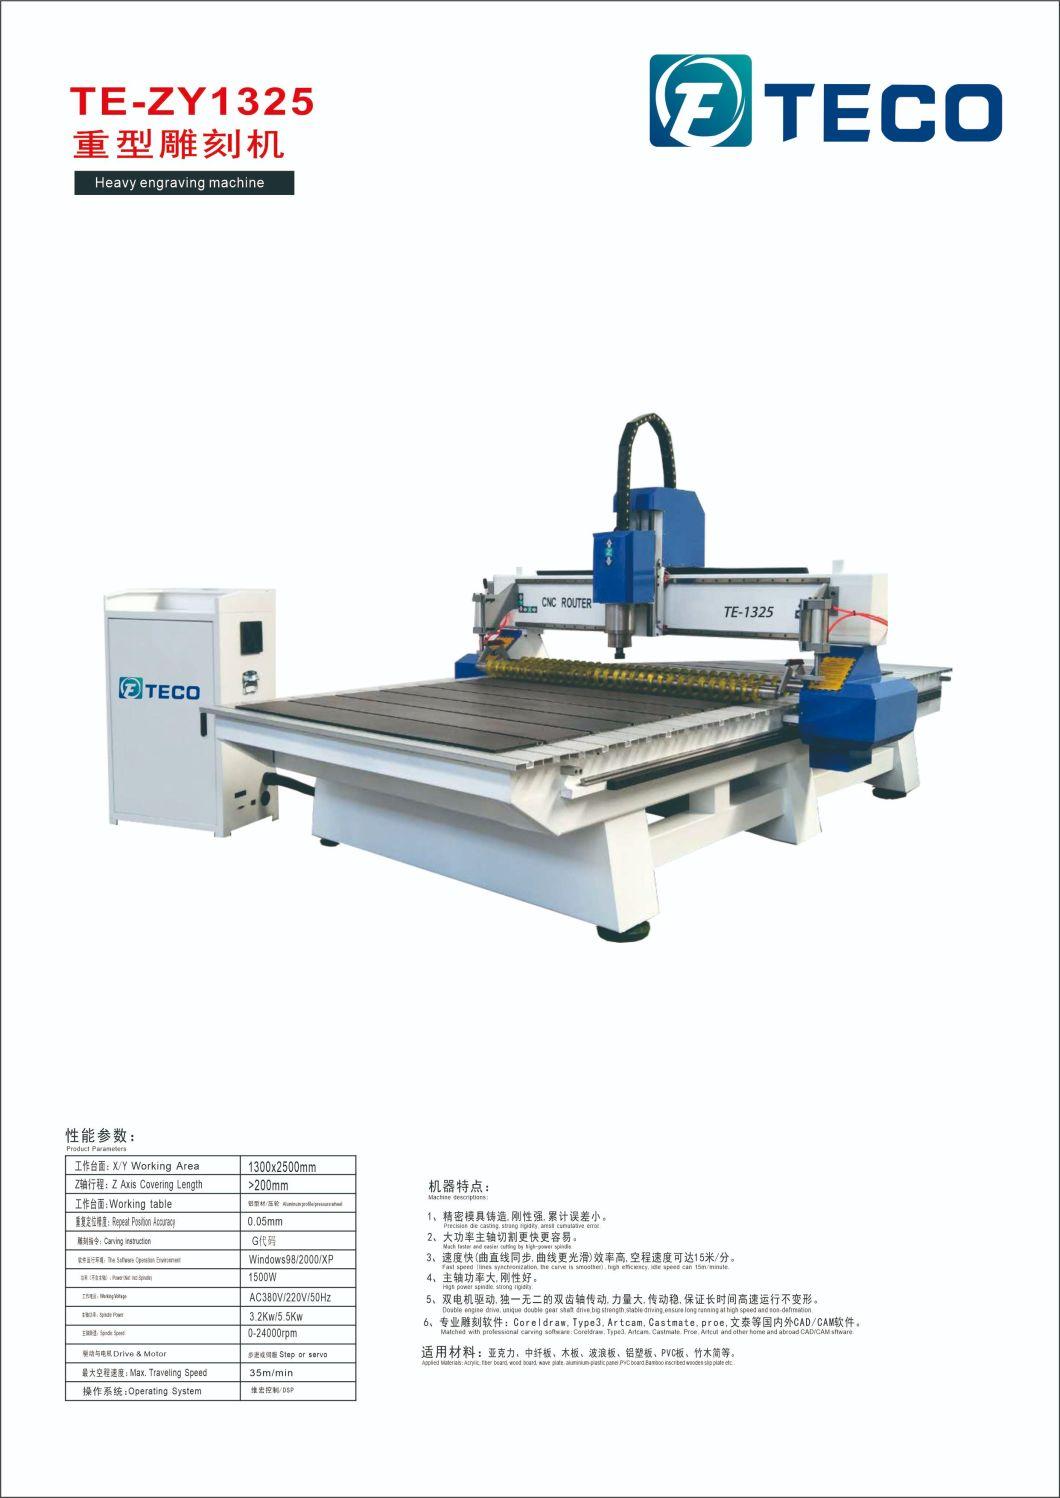 CNC Router Woodworking Advertising Engraving Machine